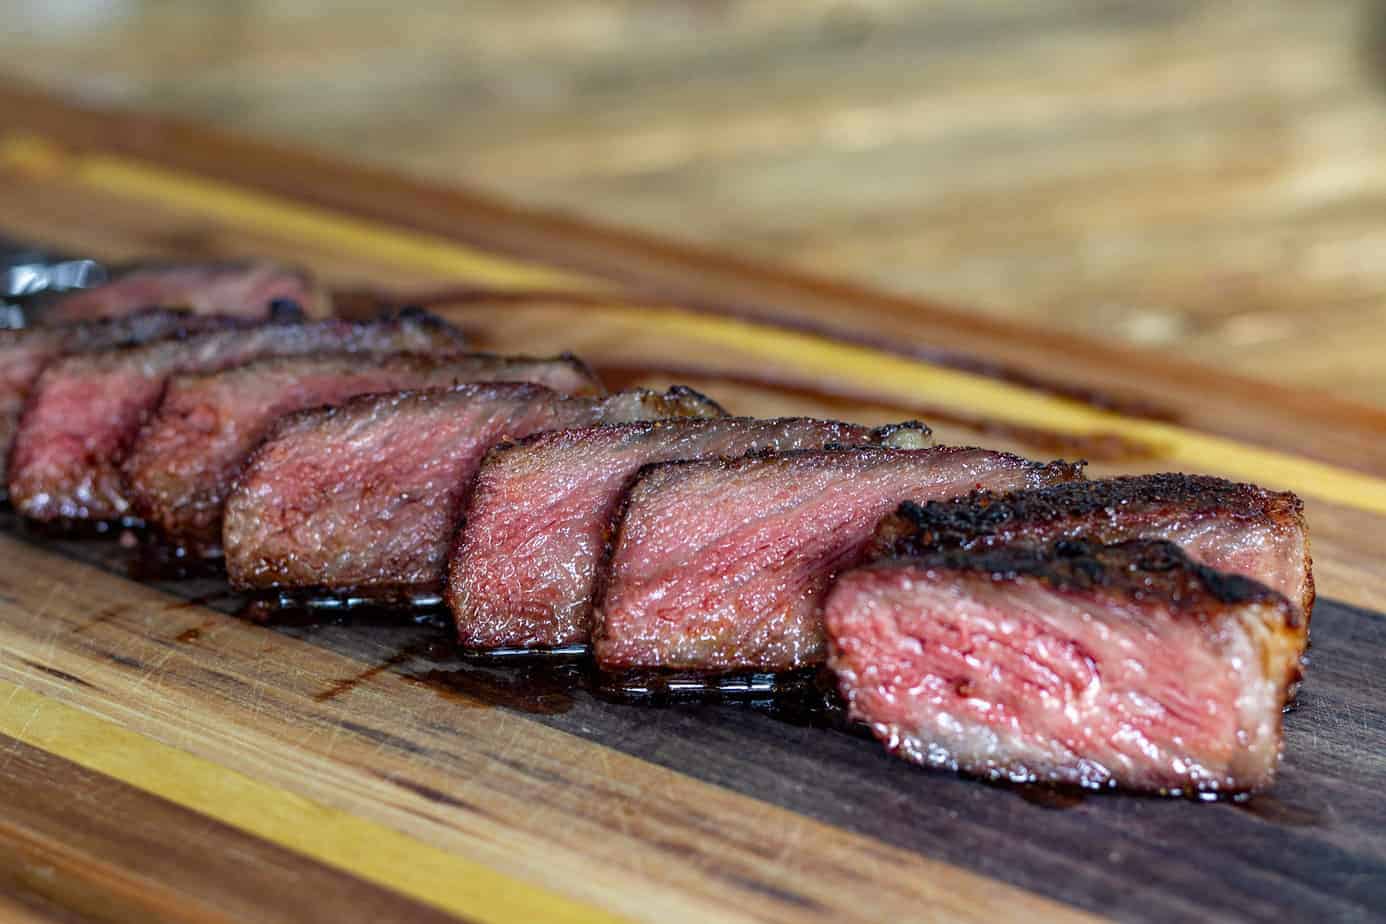 Traeger Seared Steak Using Cast Iron : 4 Steps (with Pictures